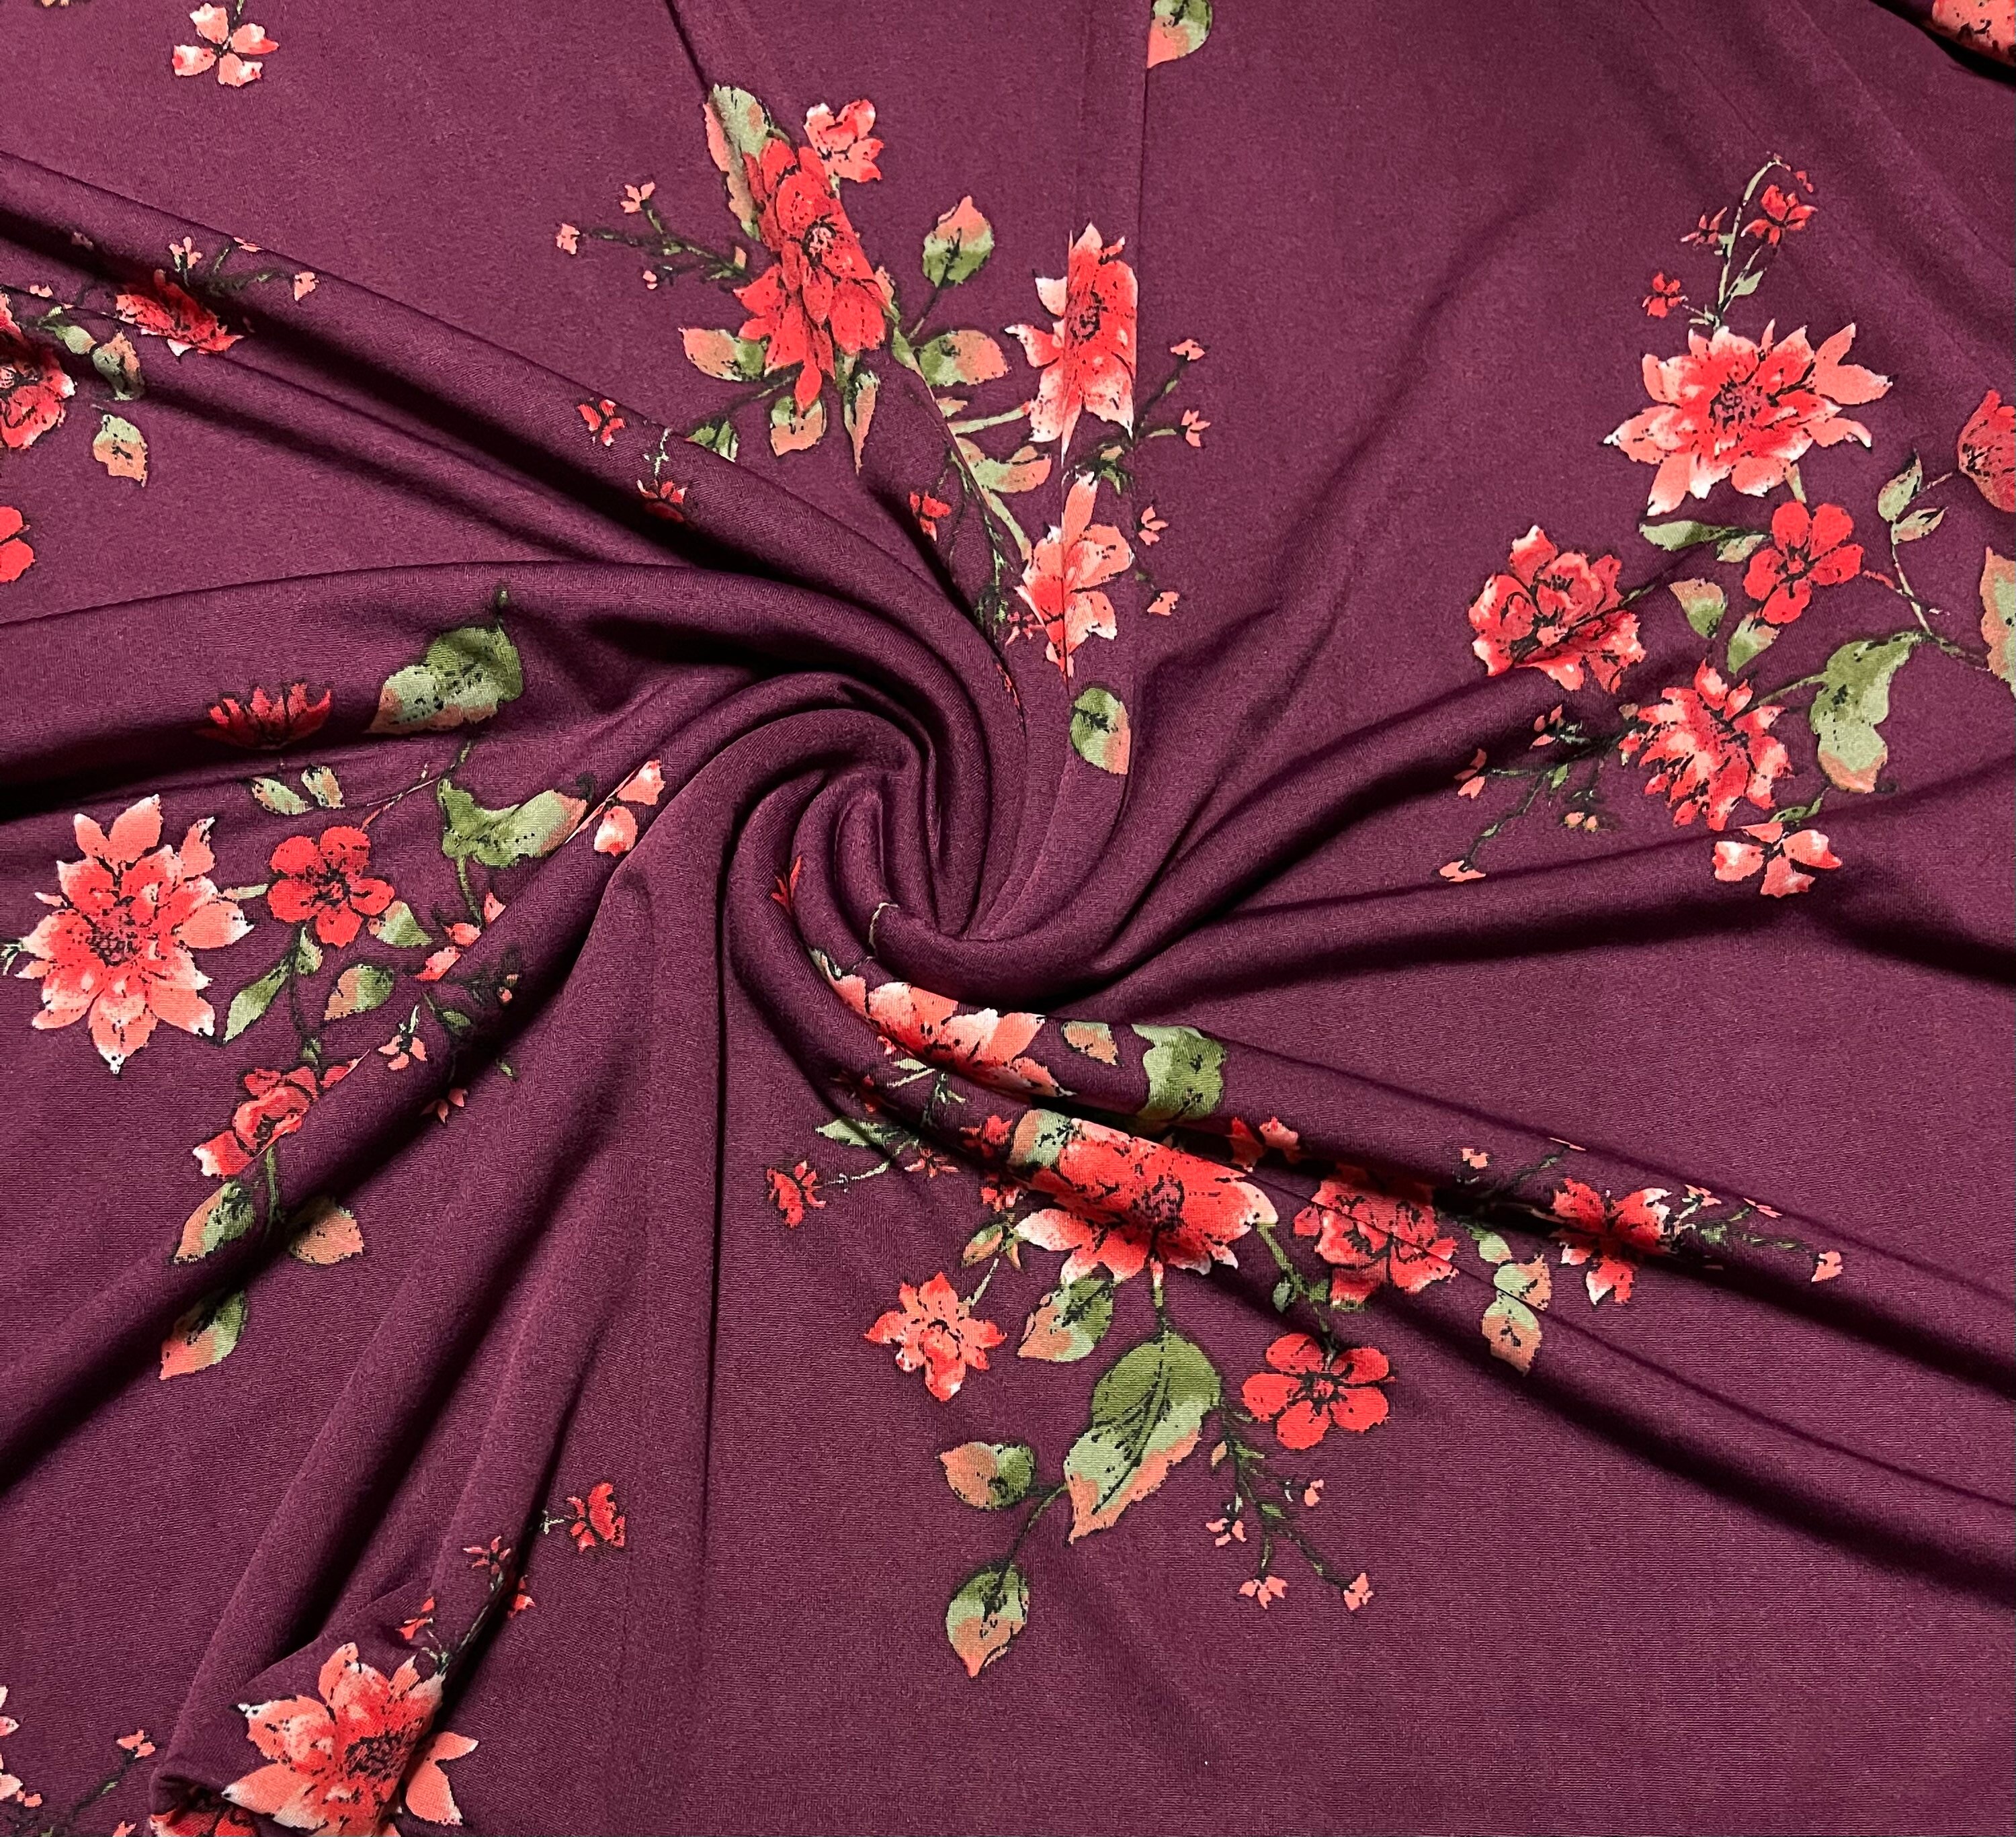 Stretch polyester lycra/jersey large floral dress fabric  £5.50/m 1.40m/55” wide 